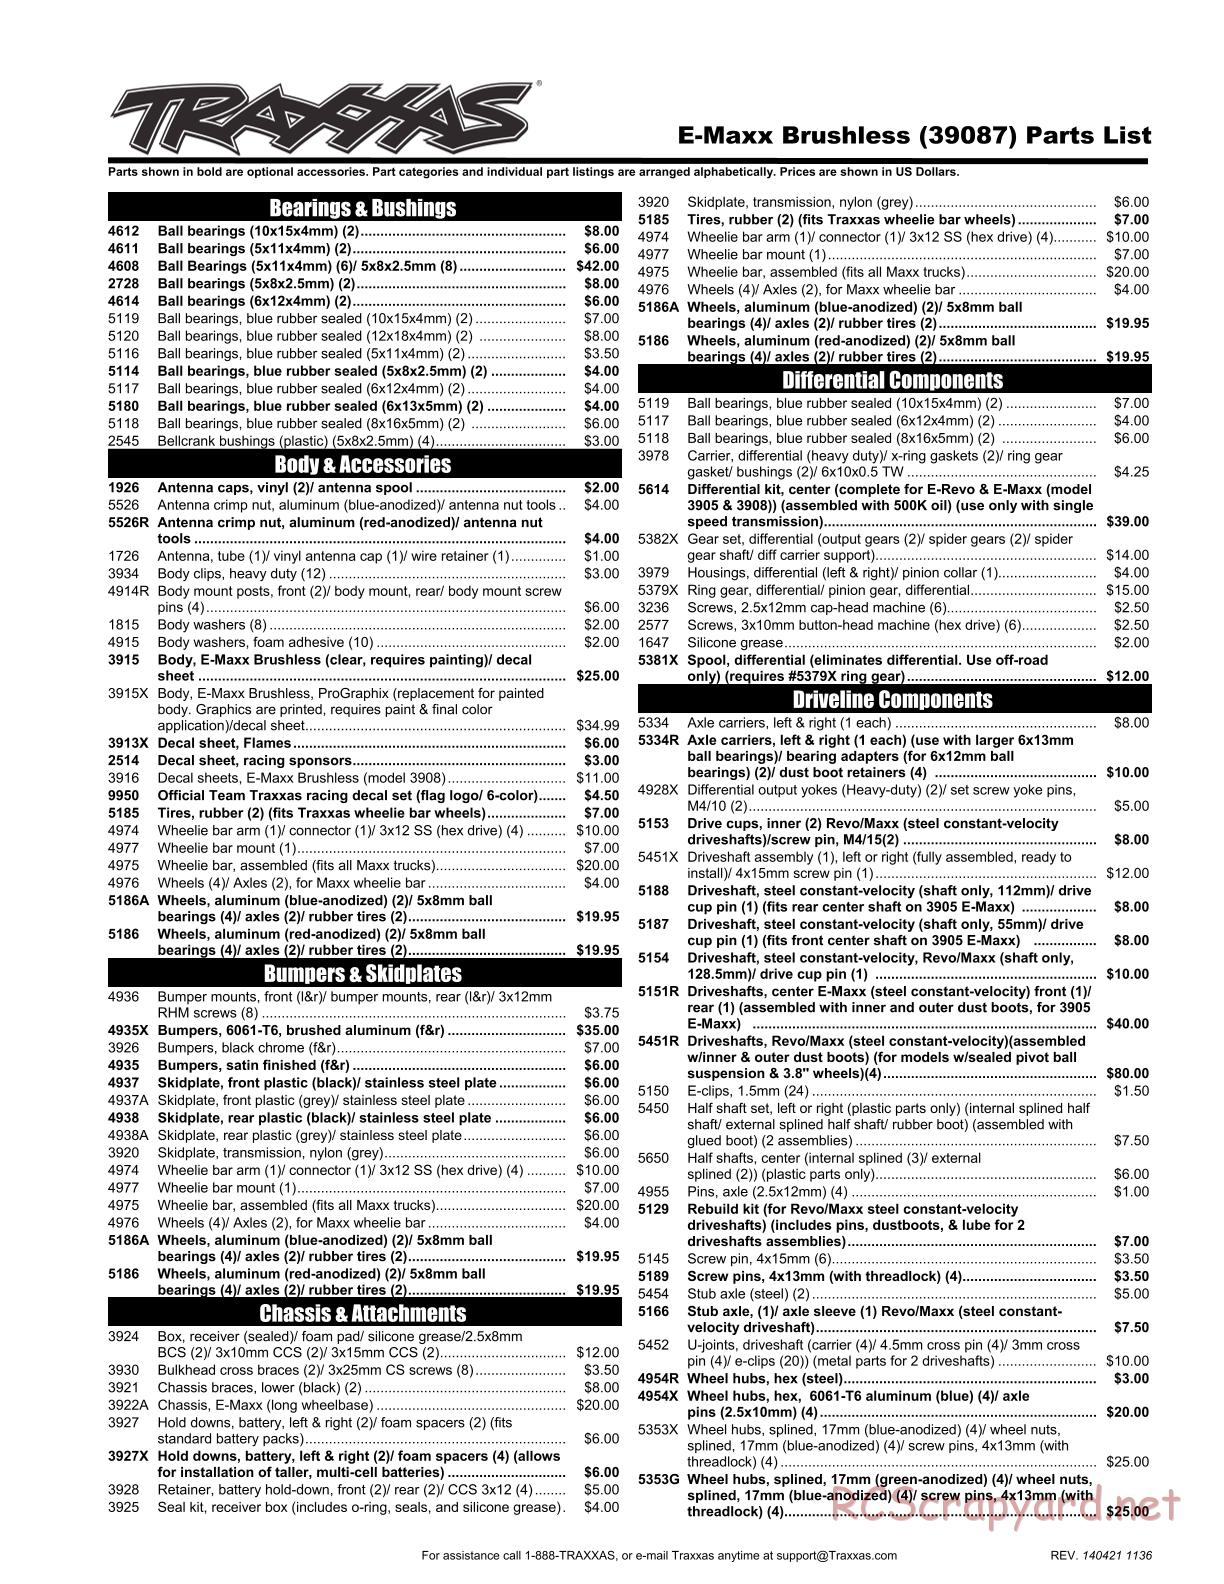 Traxxas - E-Maxx Brushless (2014) - Parts List - Page 1